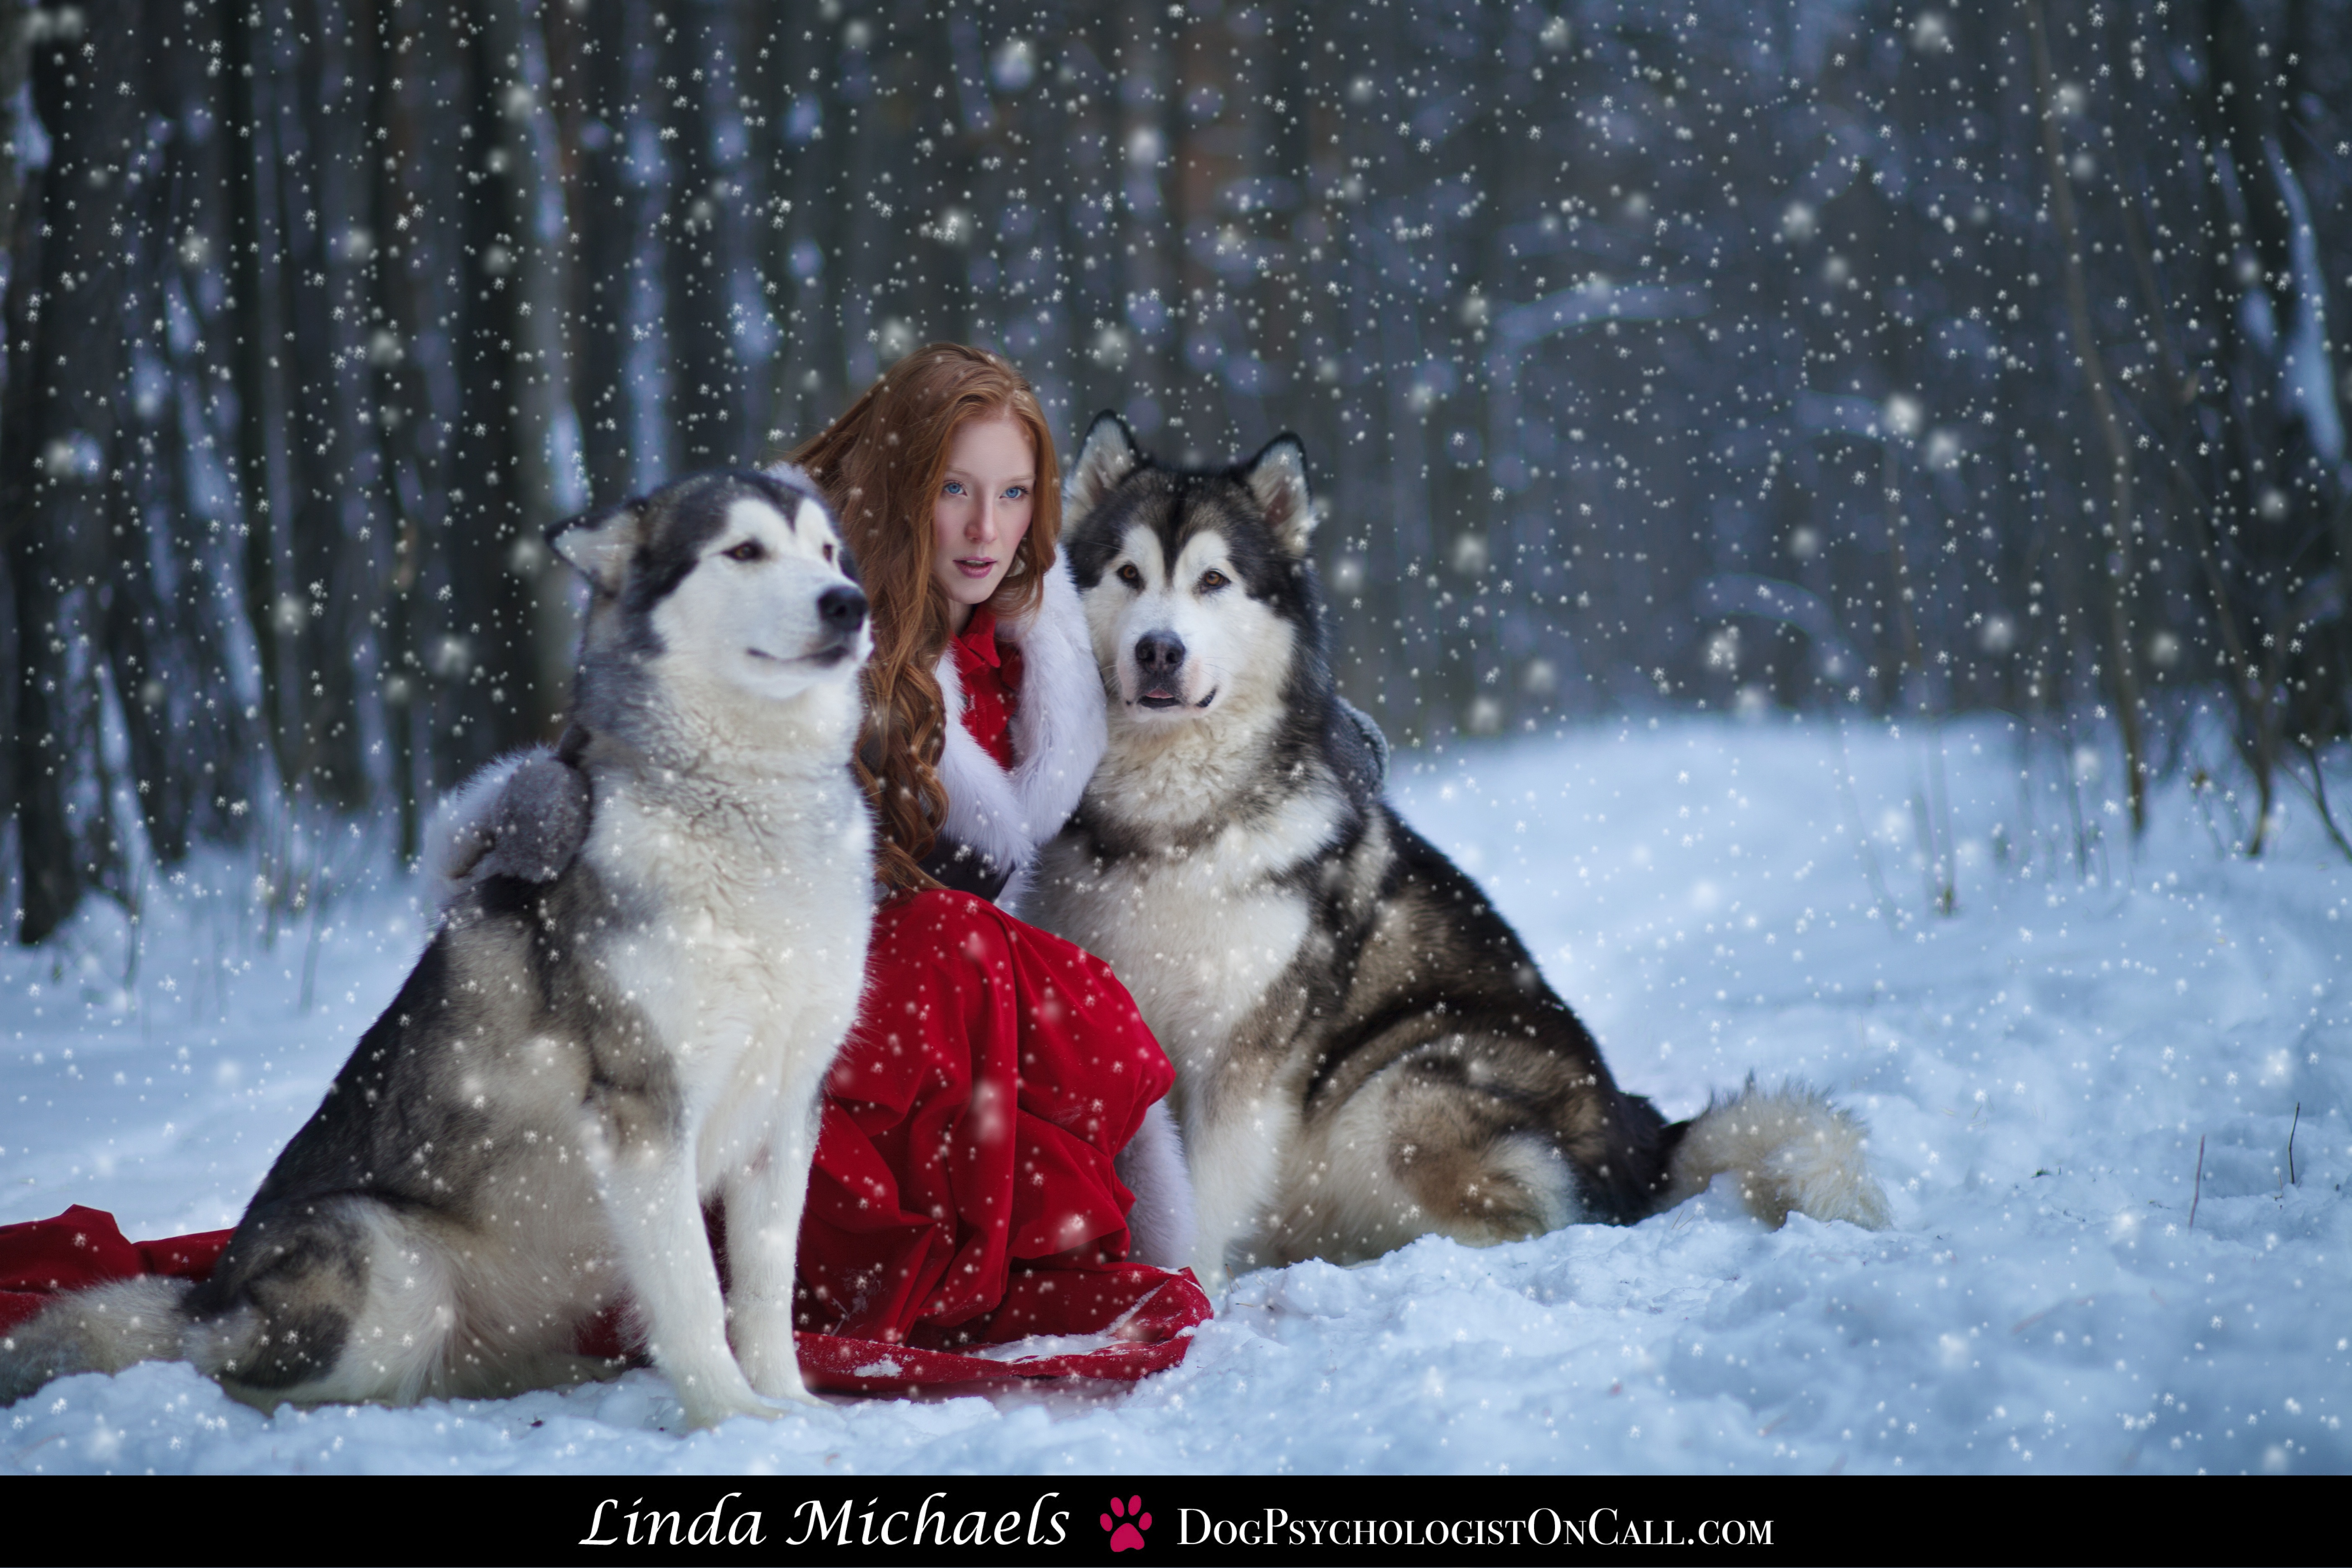 Top 10 Dog Holiday Gifts That Last a Lifetime.   Linda Michaels, M.A.,  Do No Harm Dog Training